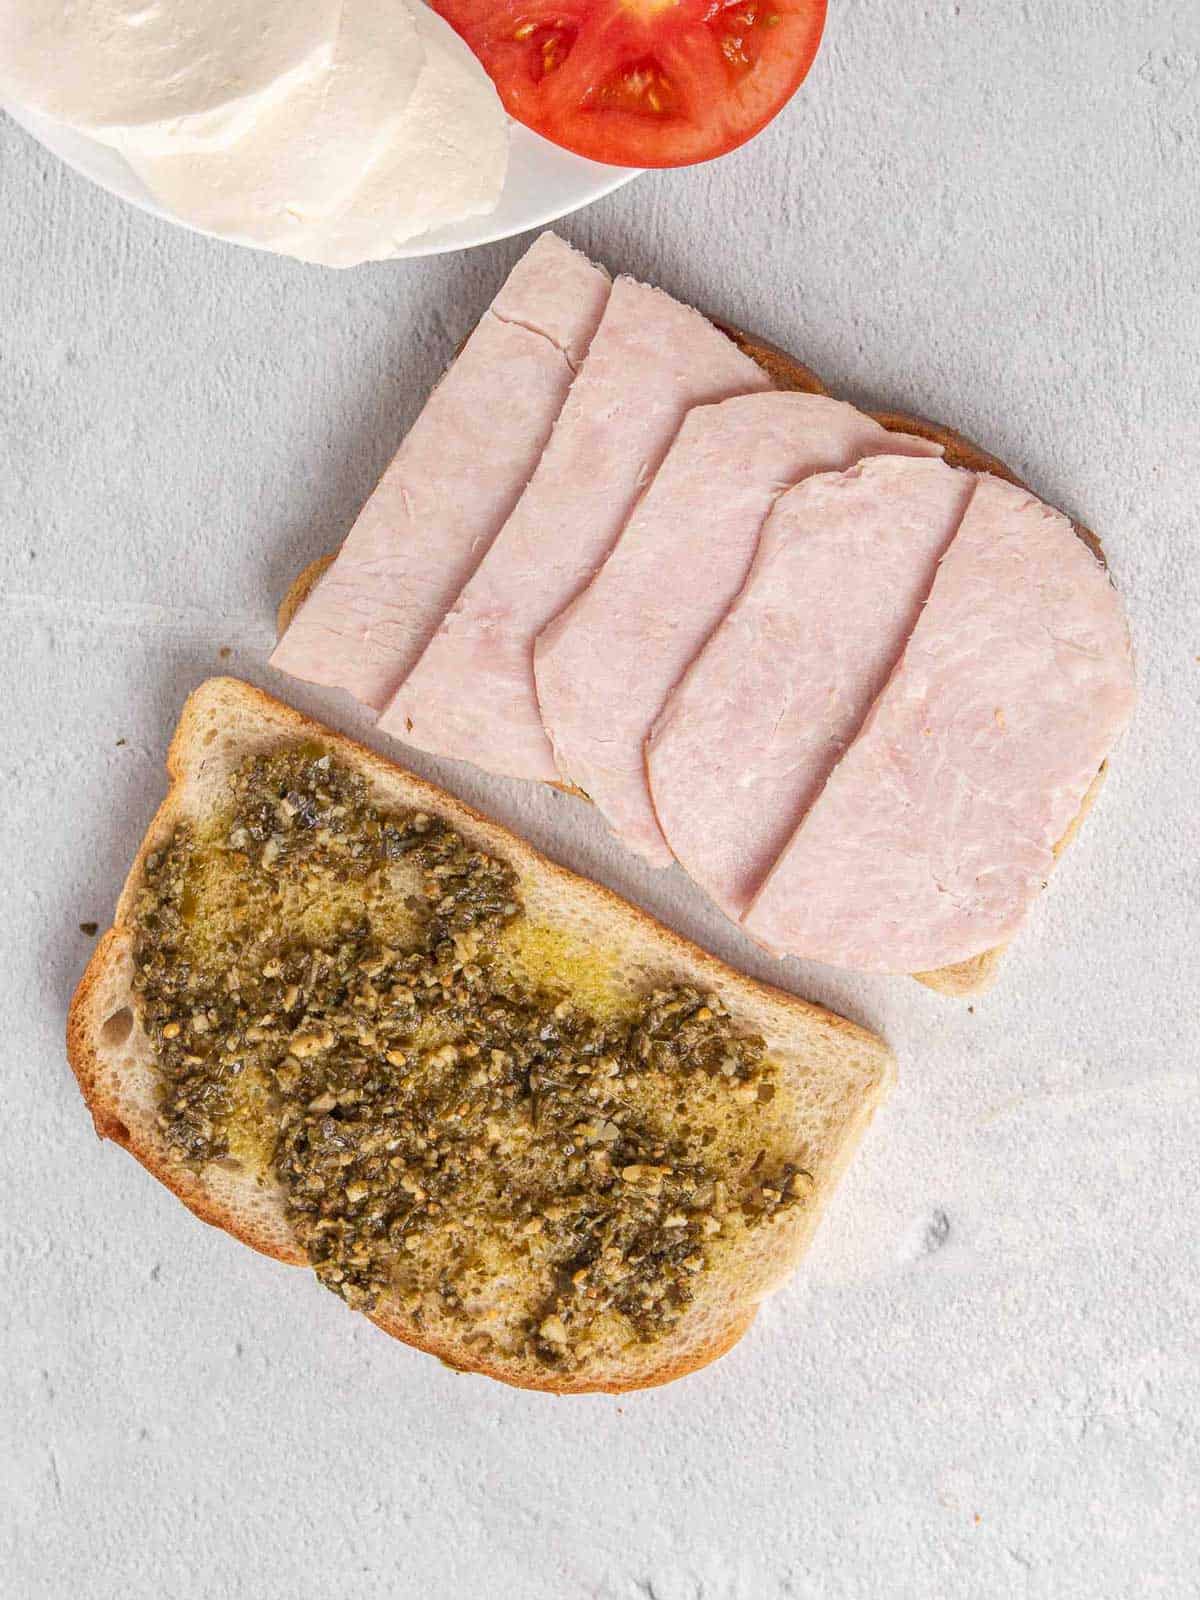 Two pieces of sourdough bread with pesto layered across the top. One one slice of bread, thick slices of turkey are layered on top.